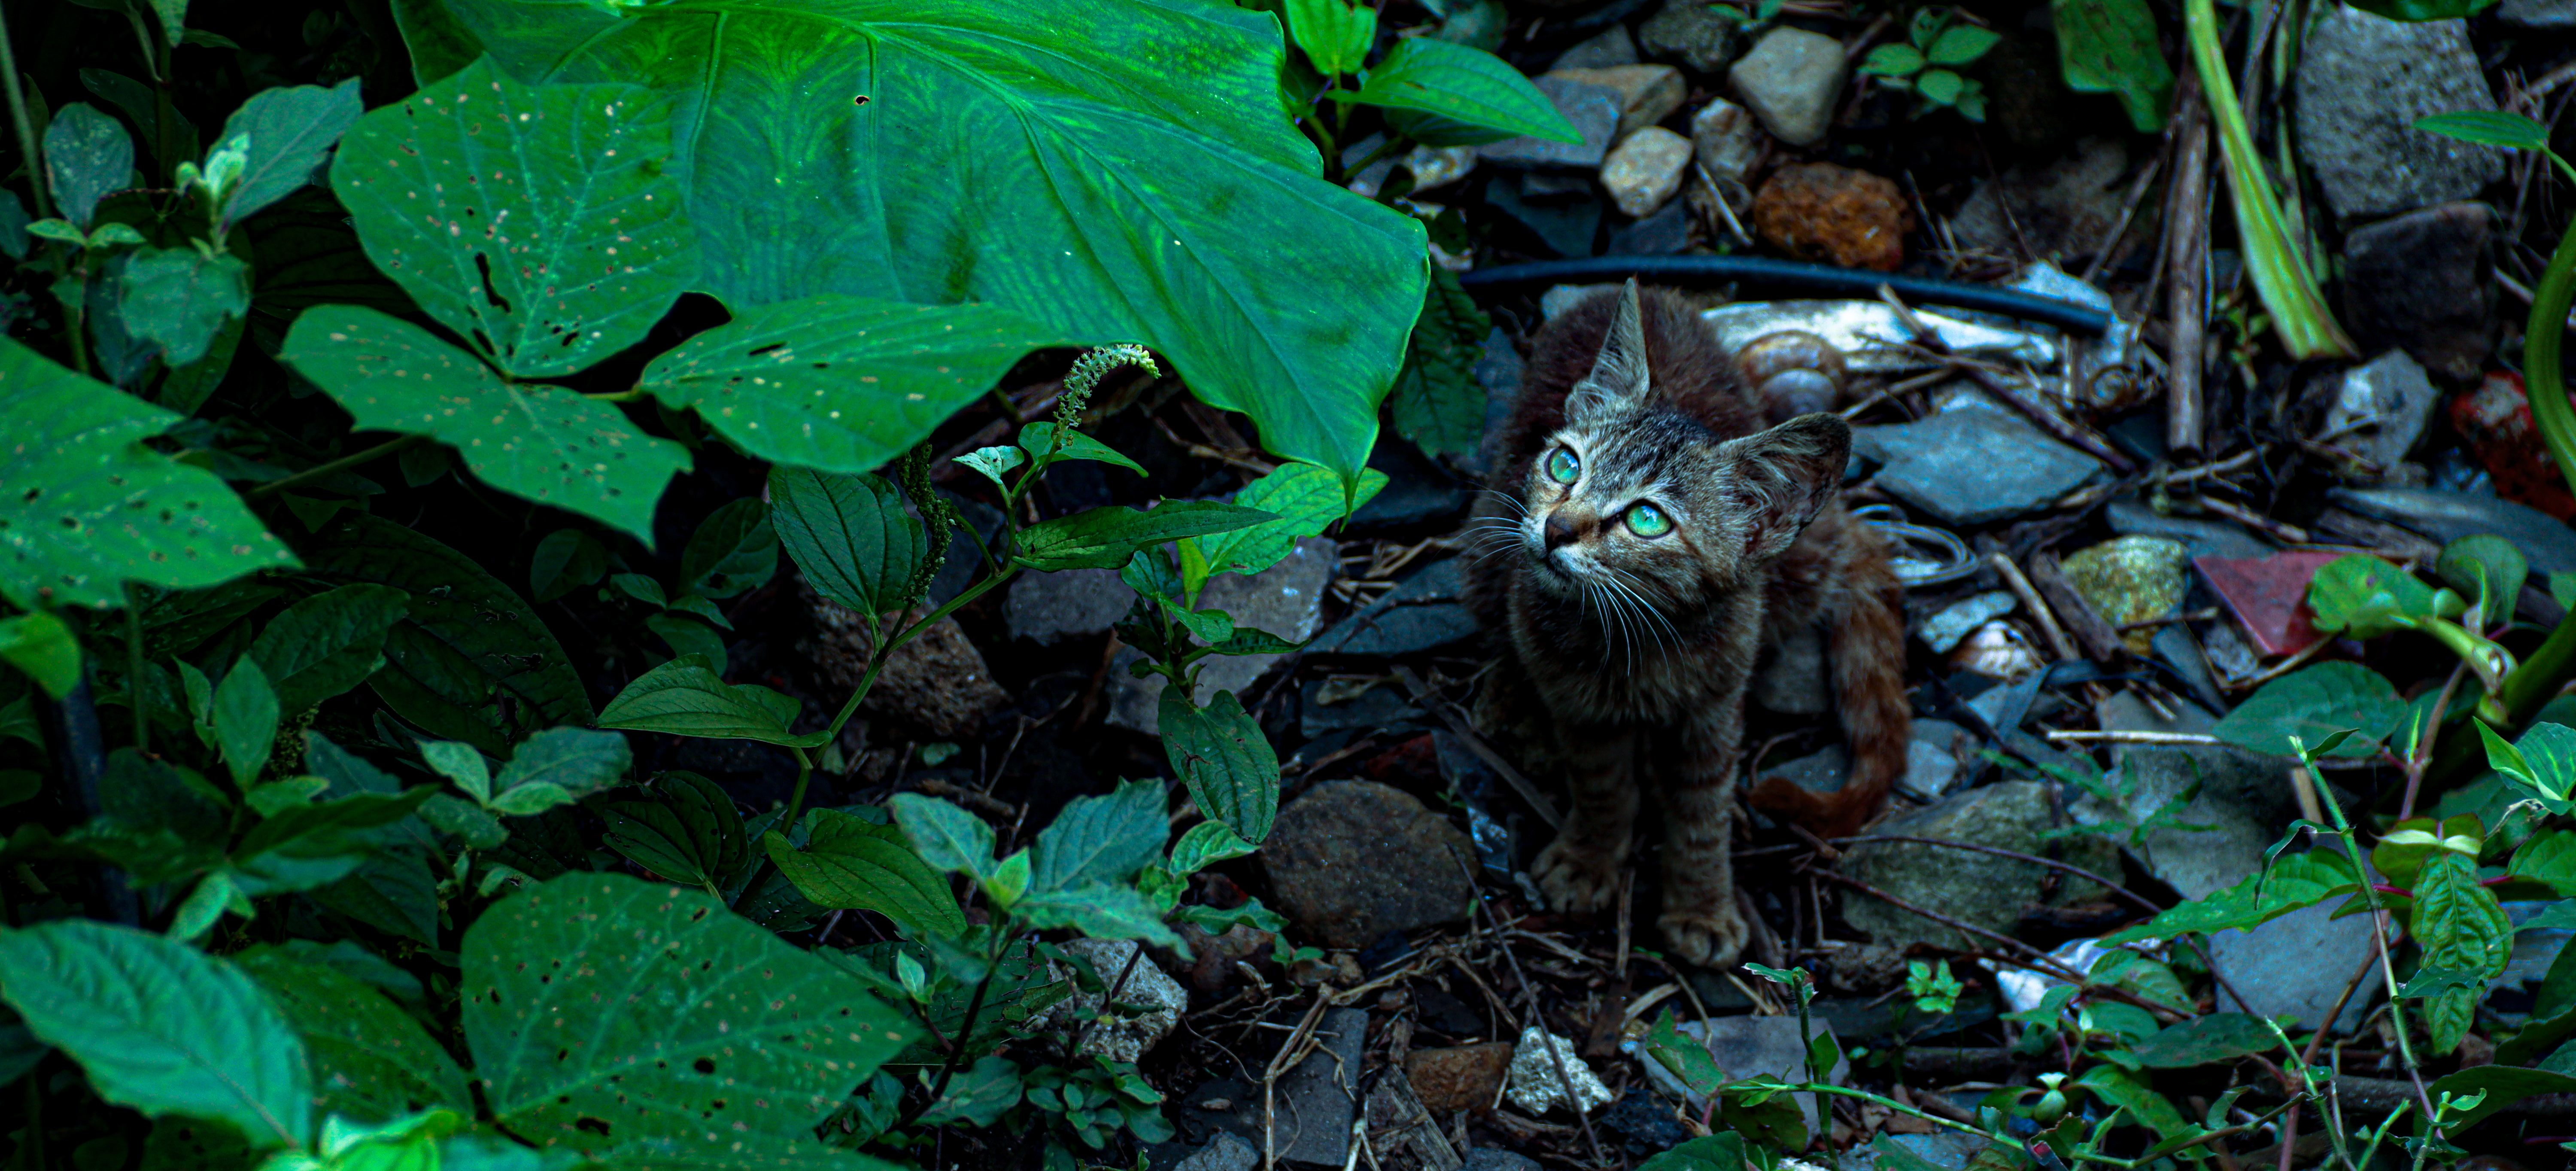 General 6000x2727 cats animal eyes Canon vivid colors animals nature leaves plants closeup ultrawide